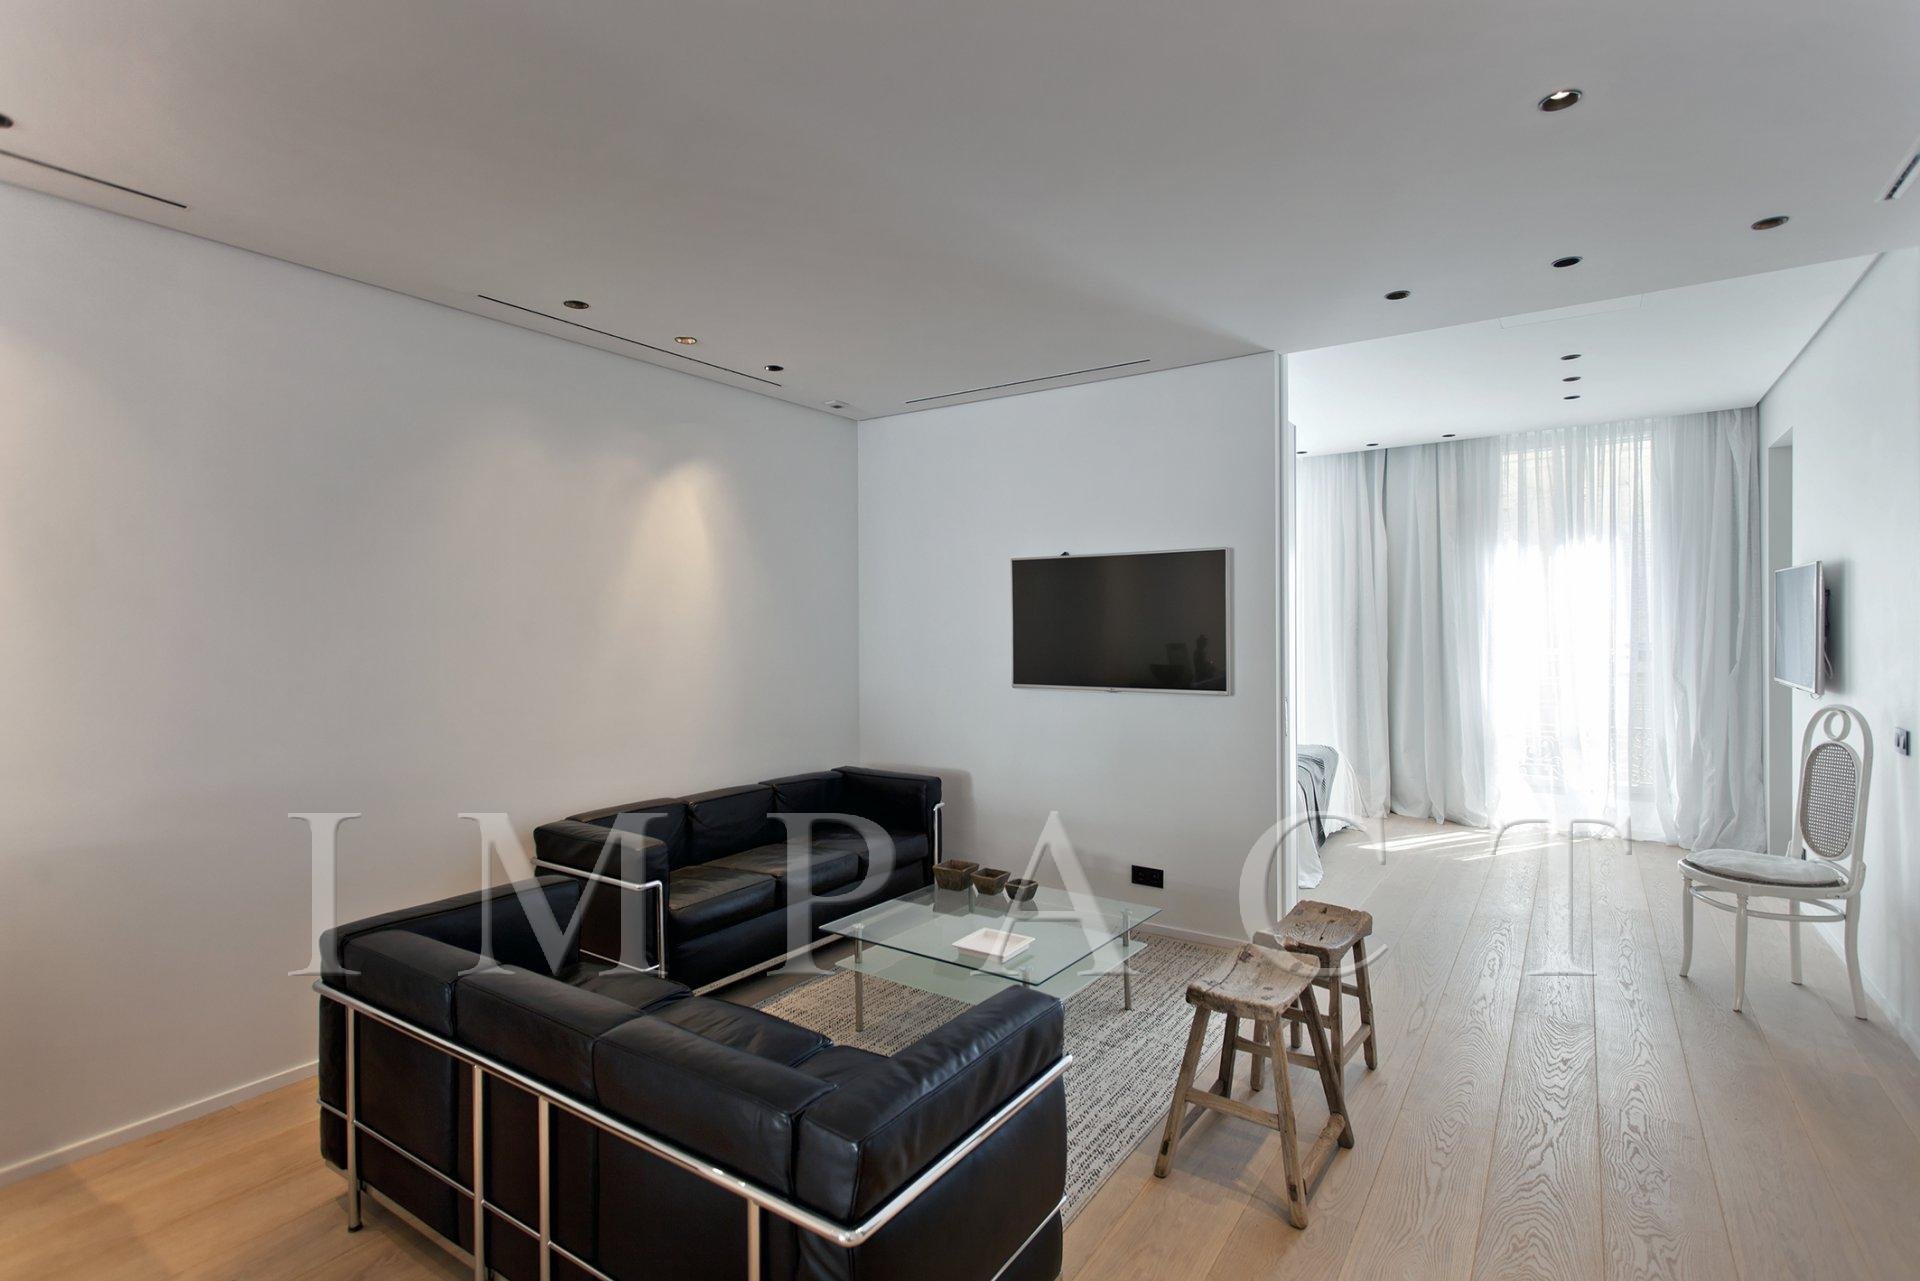 3 bedrooms apartment to rent, Cannes center